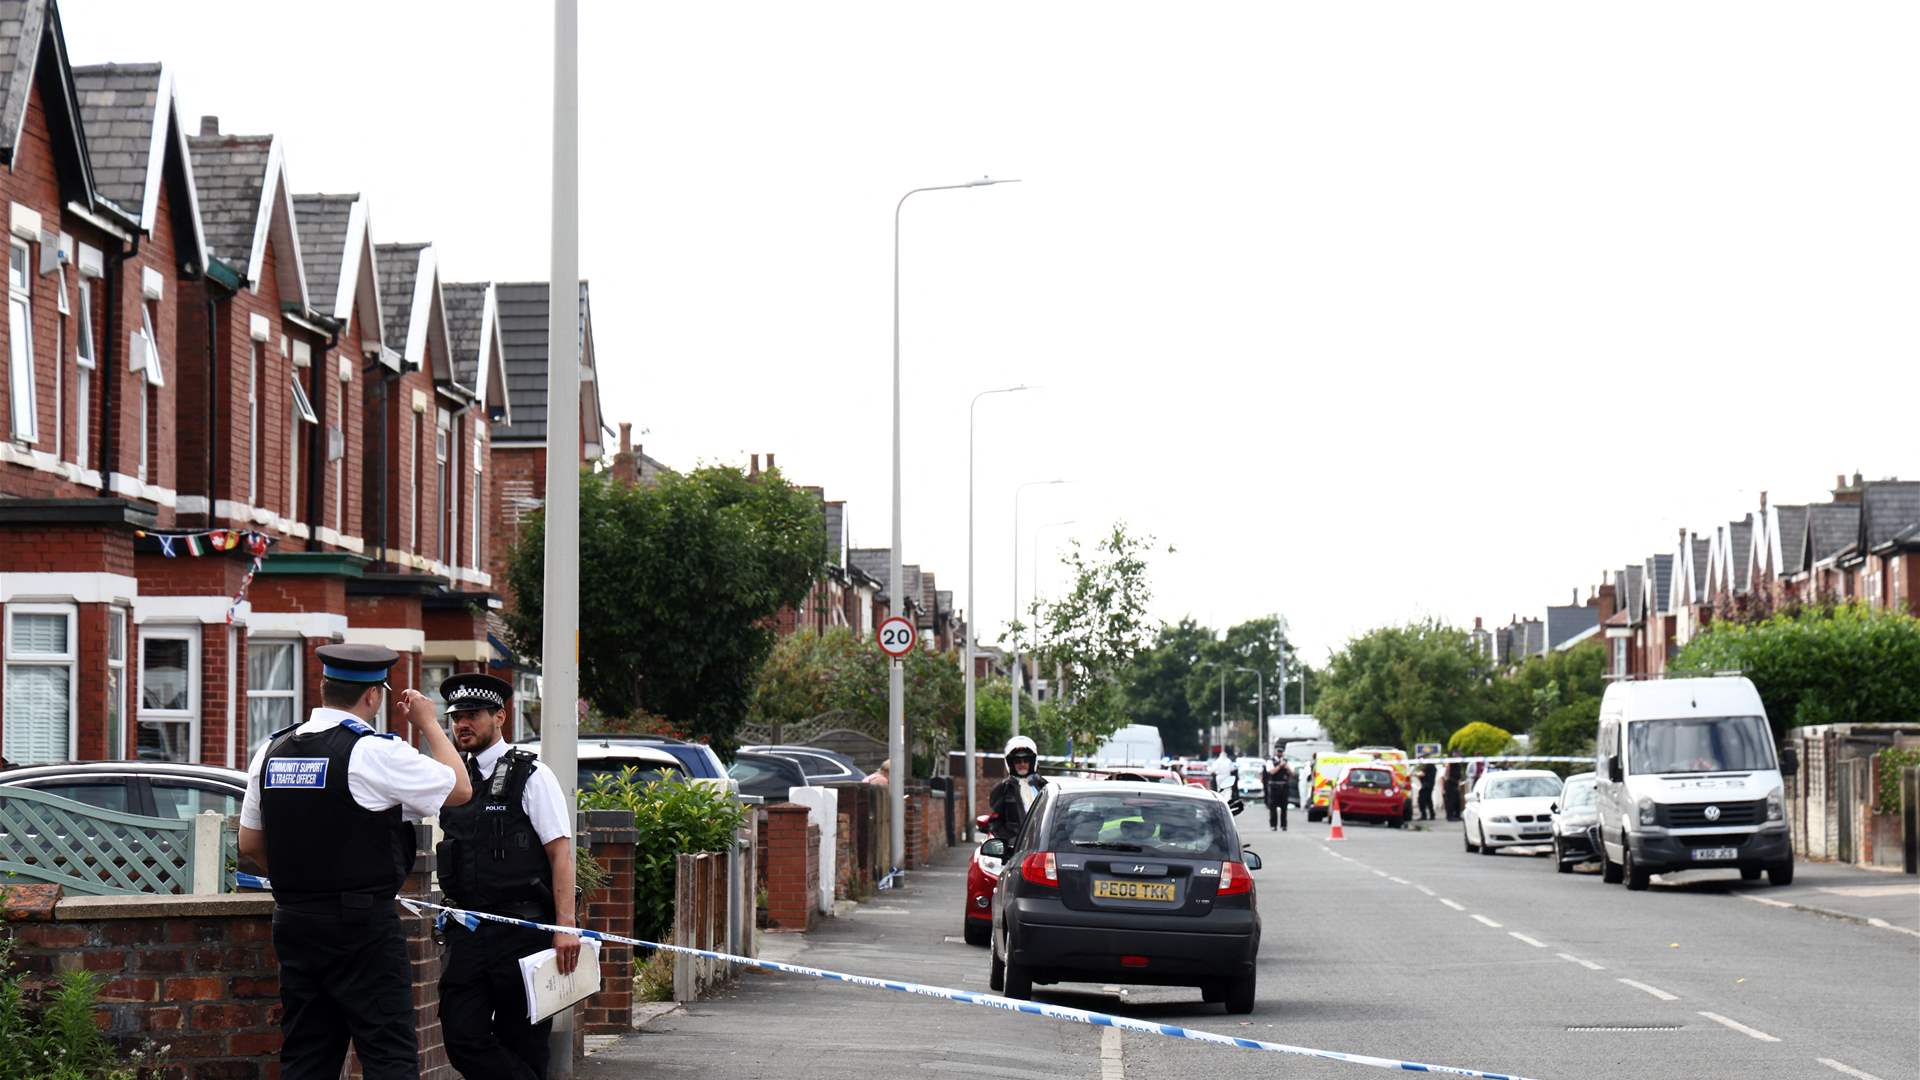 Two children dead, six critically injured in UK knife attack: Police